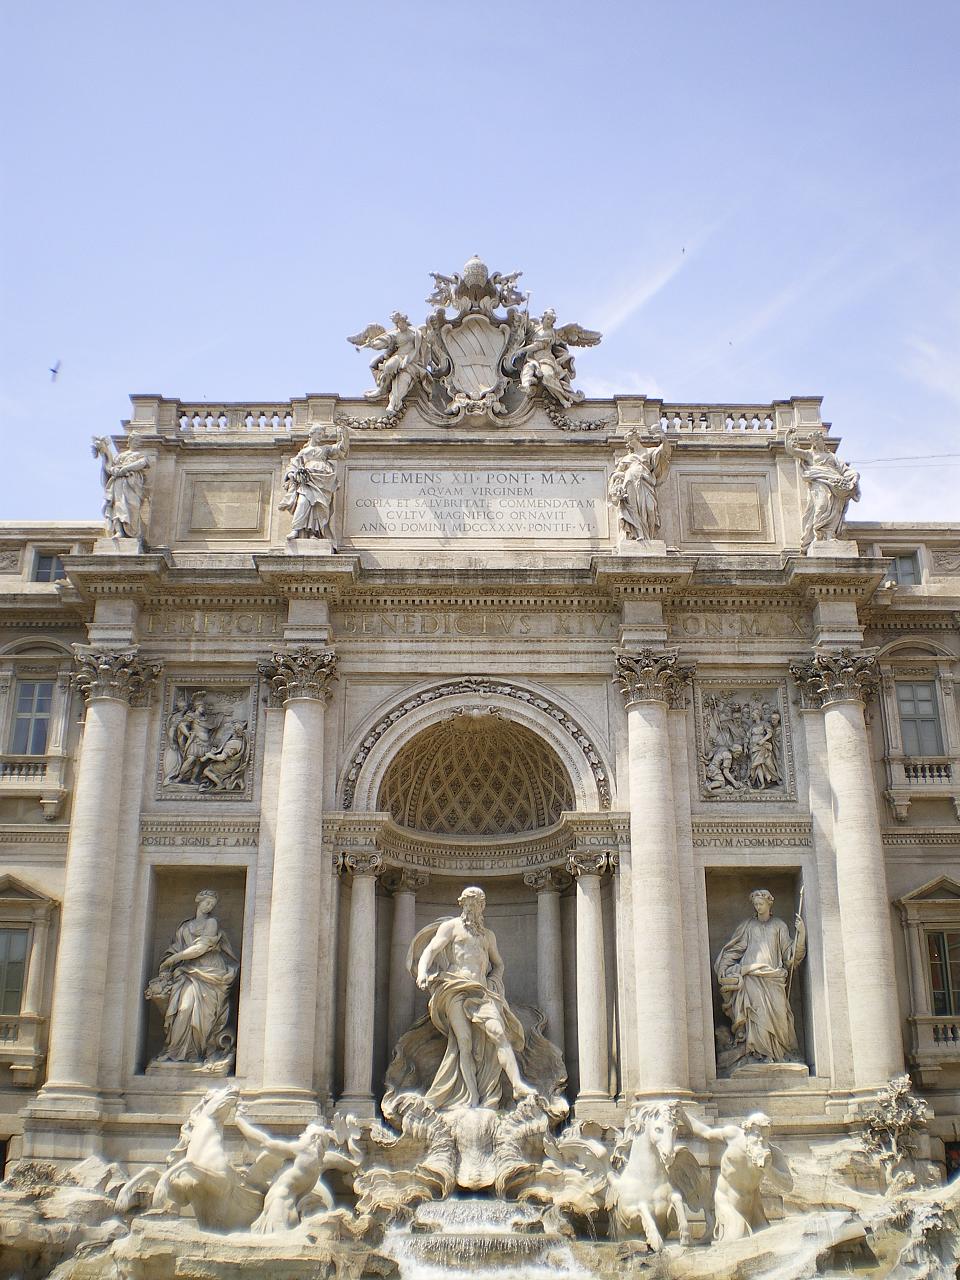 an ornate monument sits outside a large building